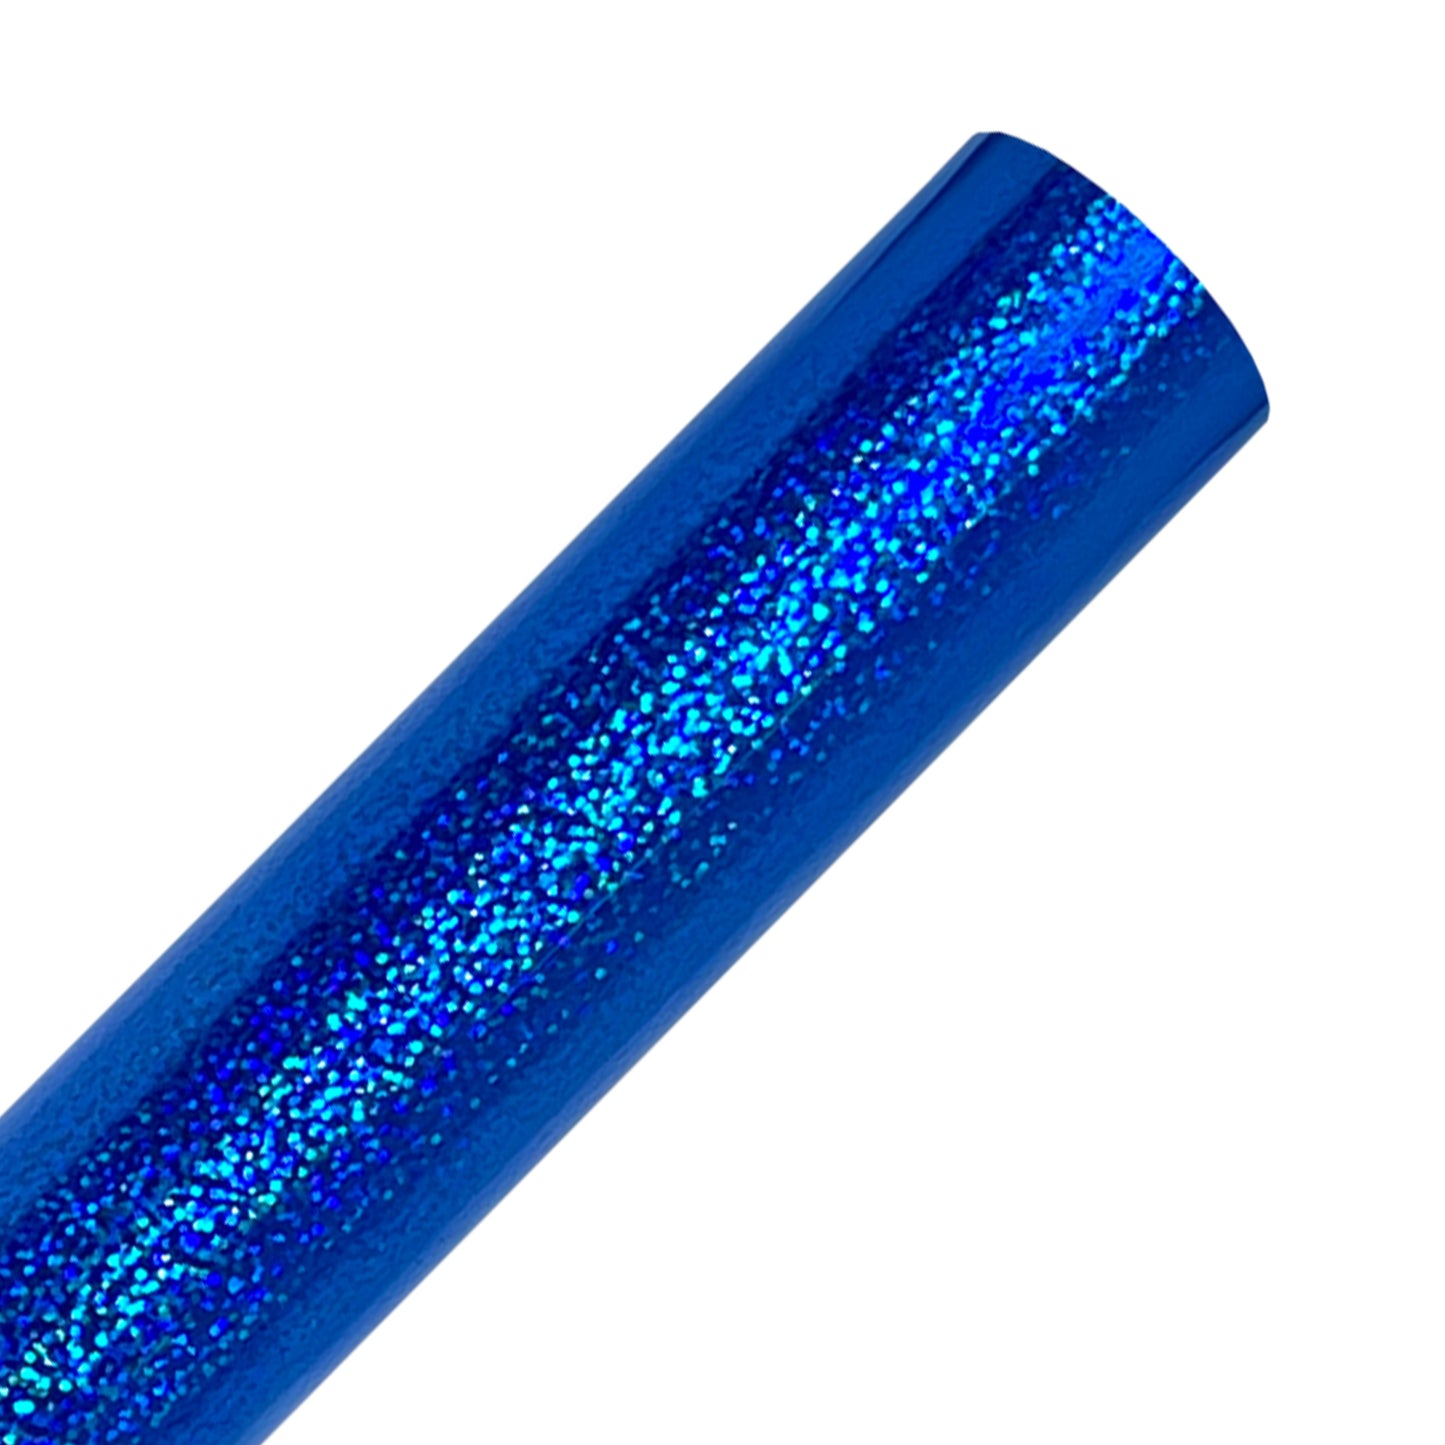 Blue Holographic Sparkle Adhesive Vinyl Sheets By Craftables